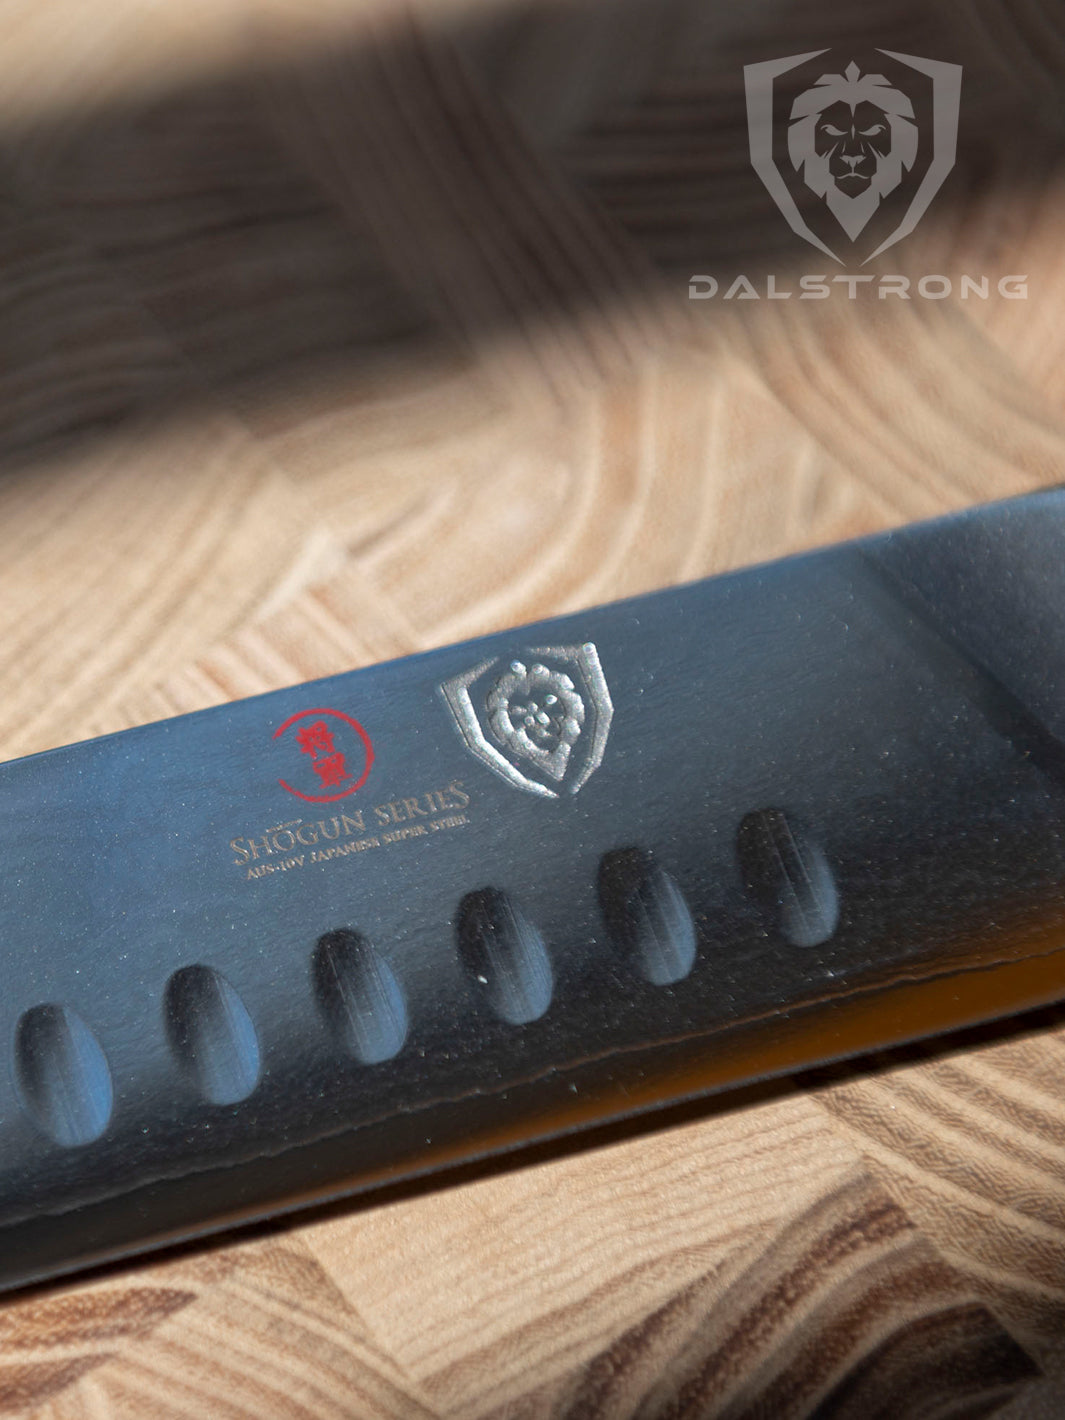 Dalstrong shogun series 12 inch slicer knife with crimson red handle featuring the Dalstrong logo and blade.